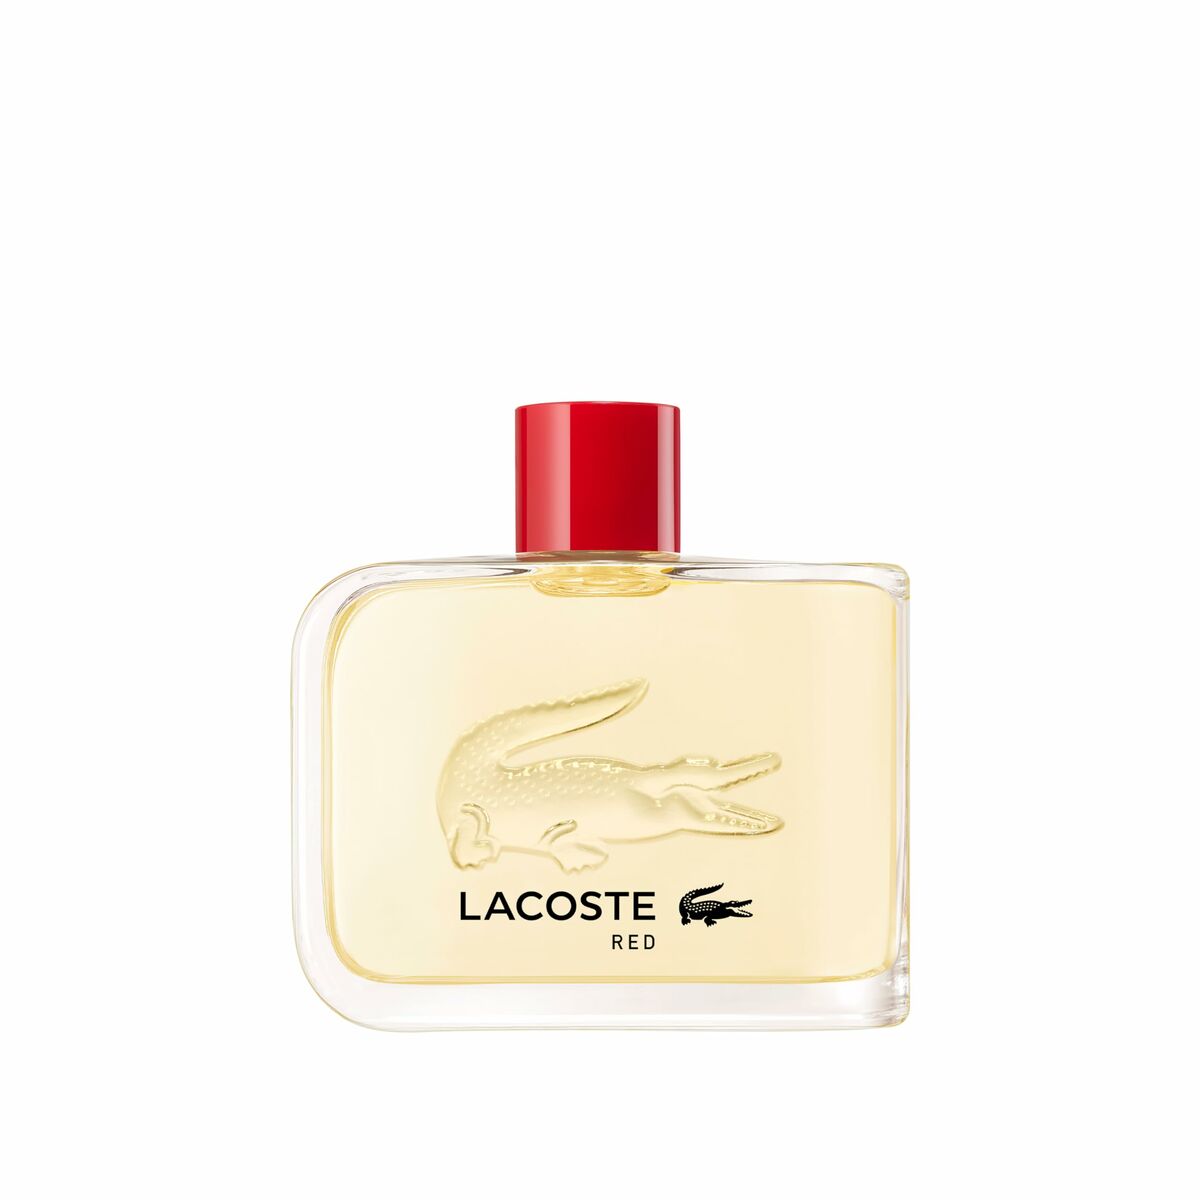 Perfume Hombre Lacoste Red EDT 125 ml